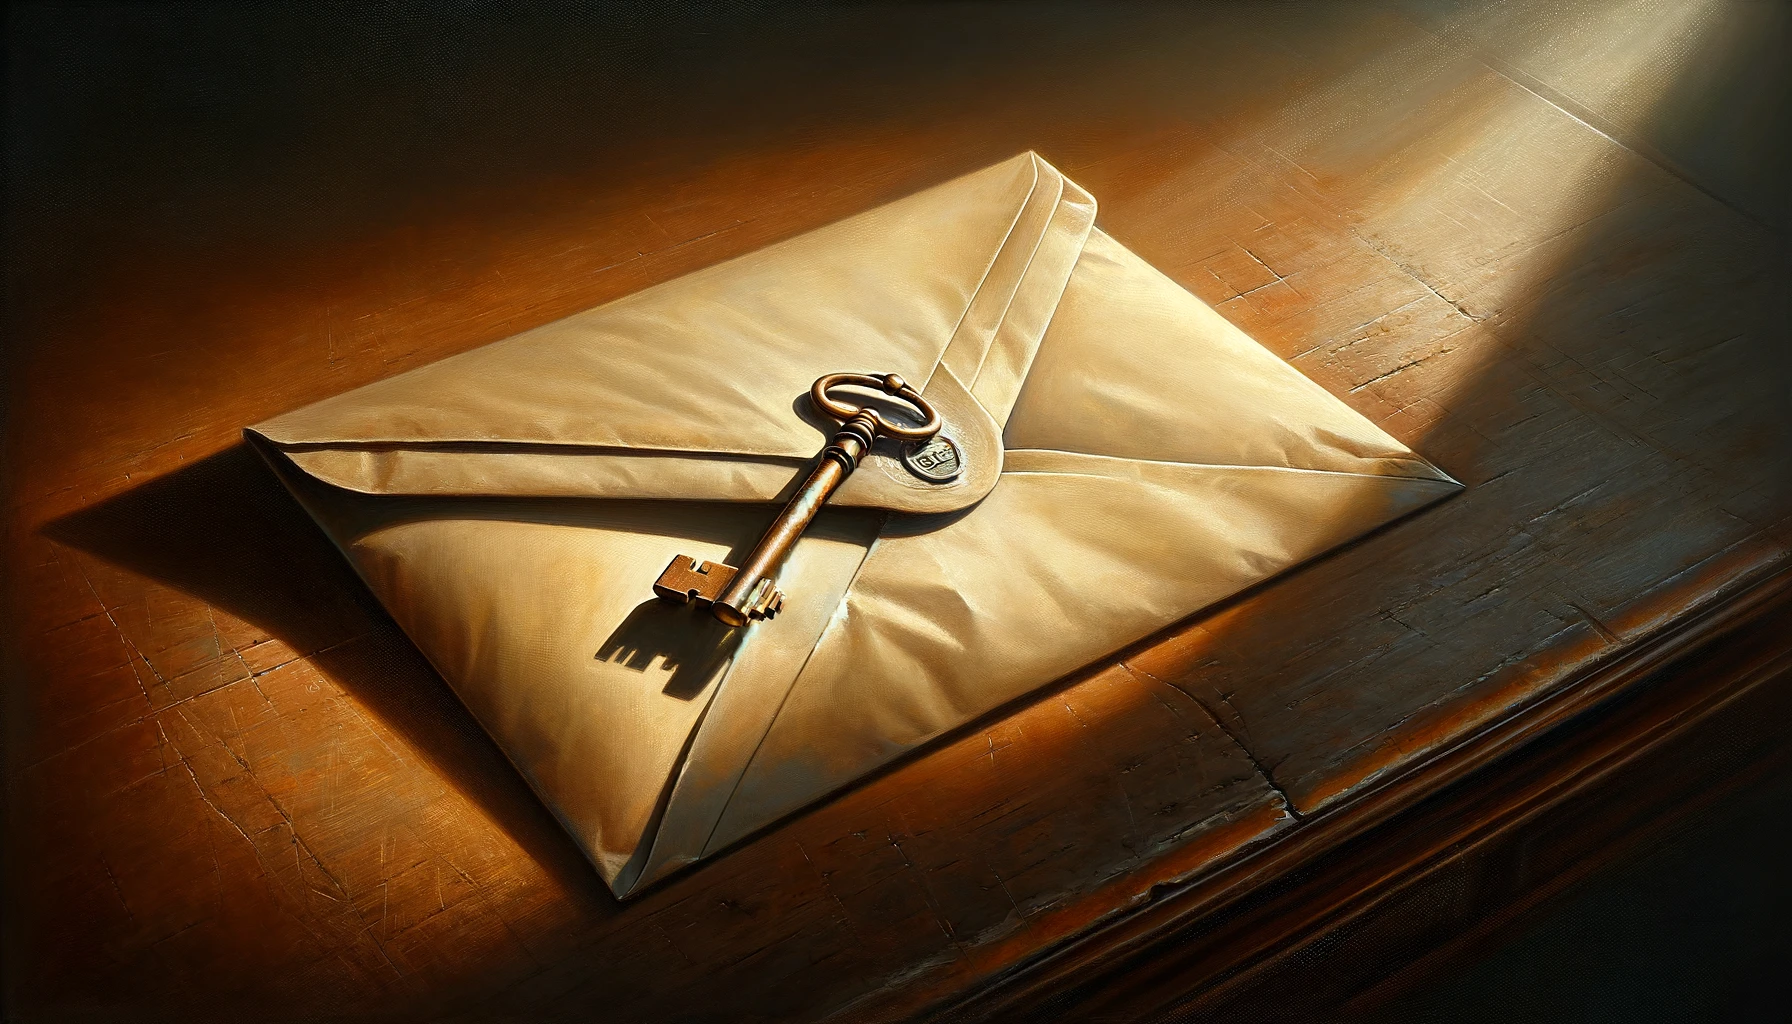 Envelope Encryption - Putting Your Encryption Key in an Envelope Is the Safer Option